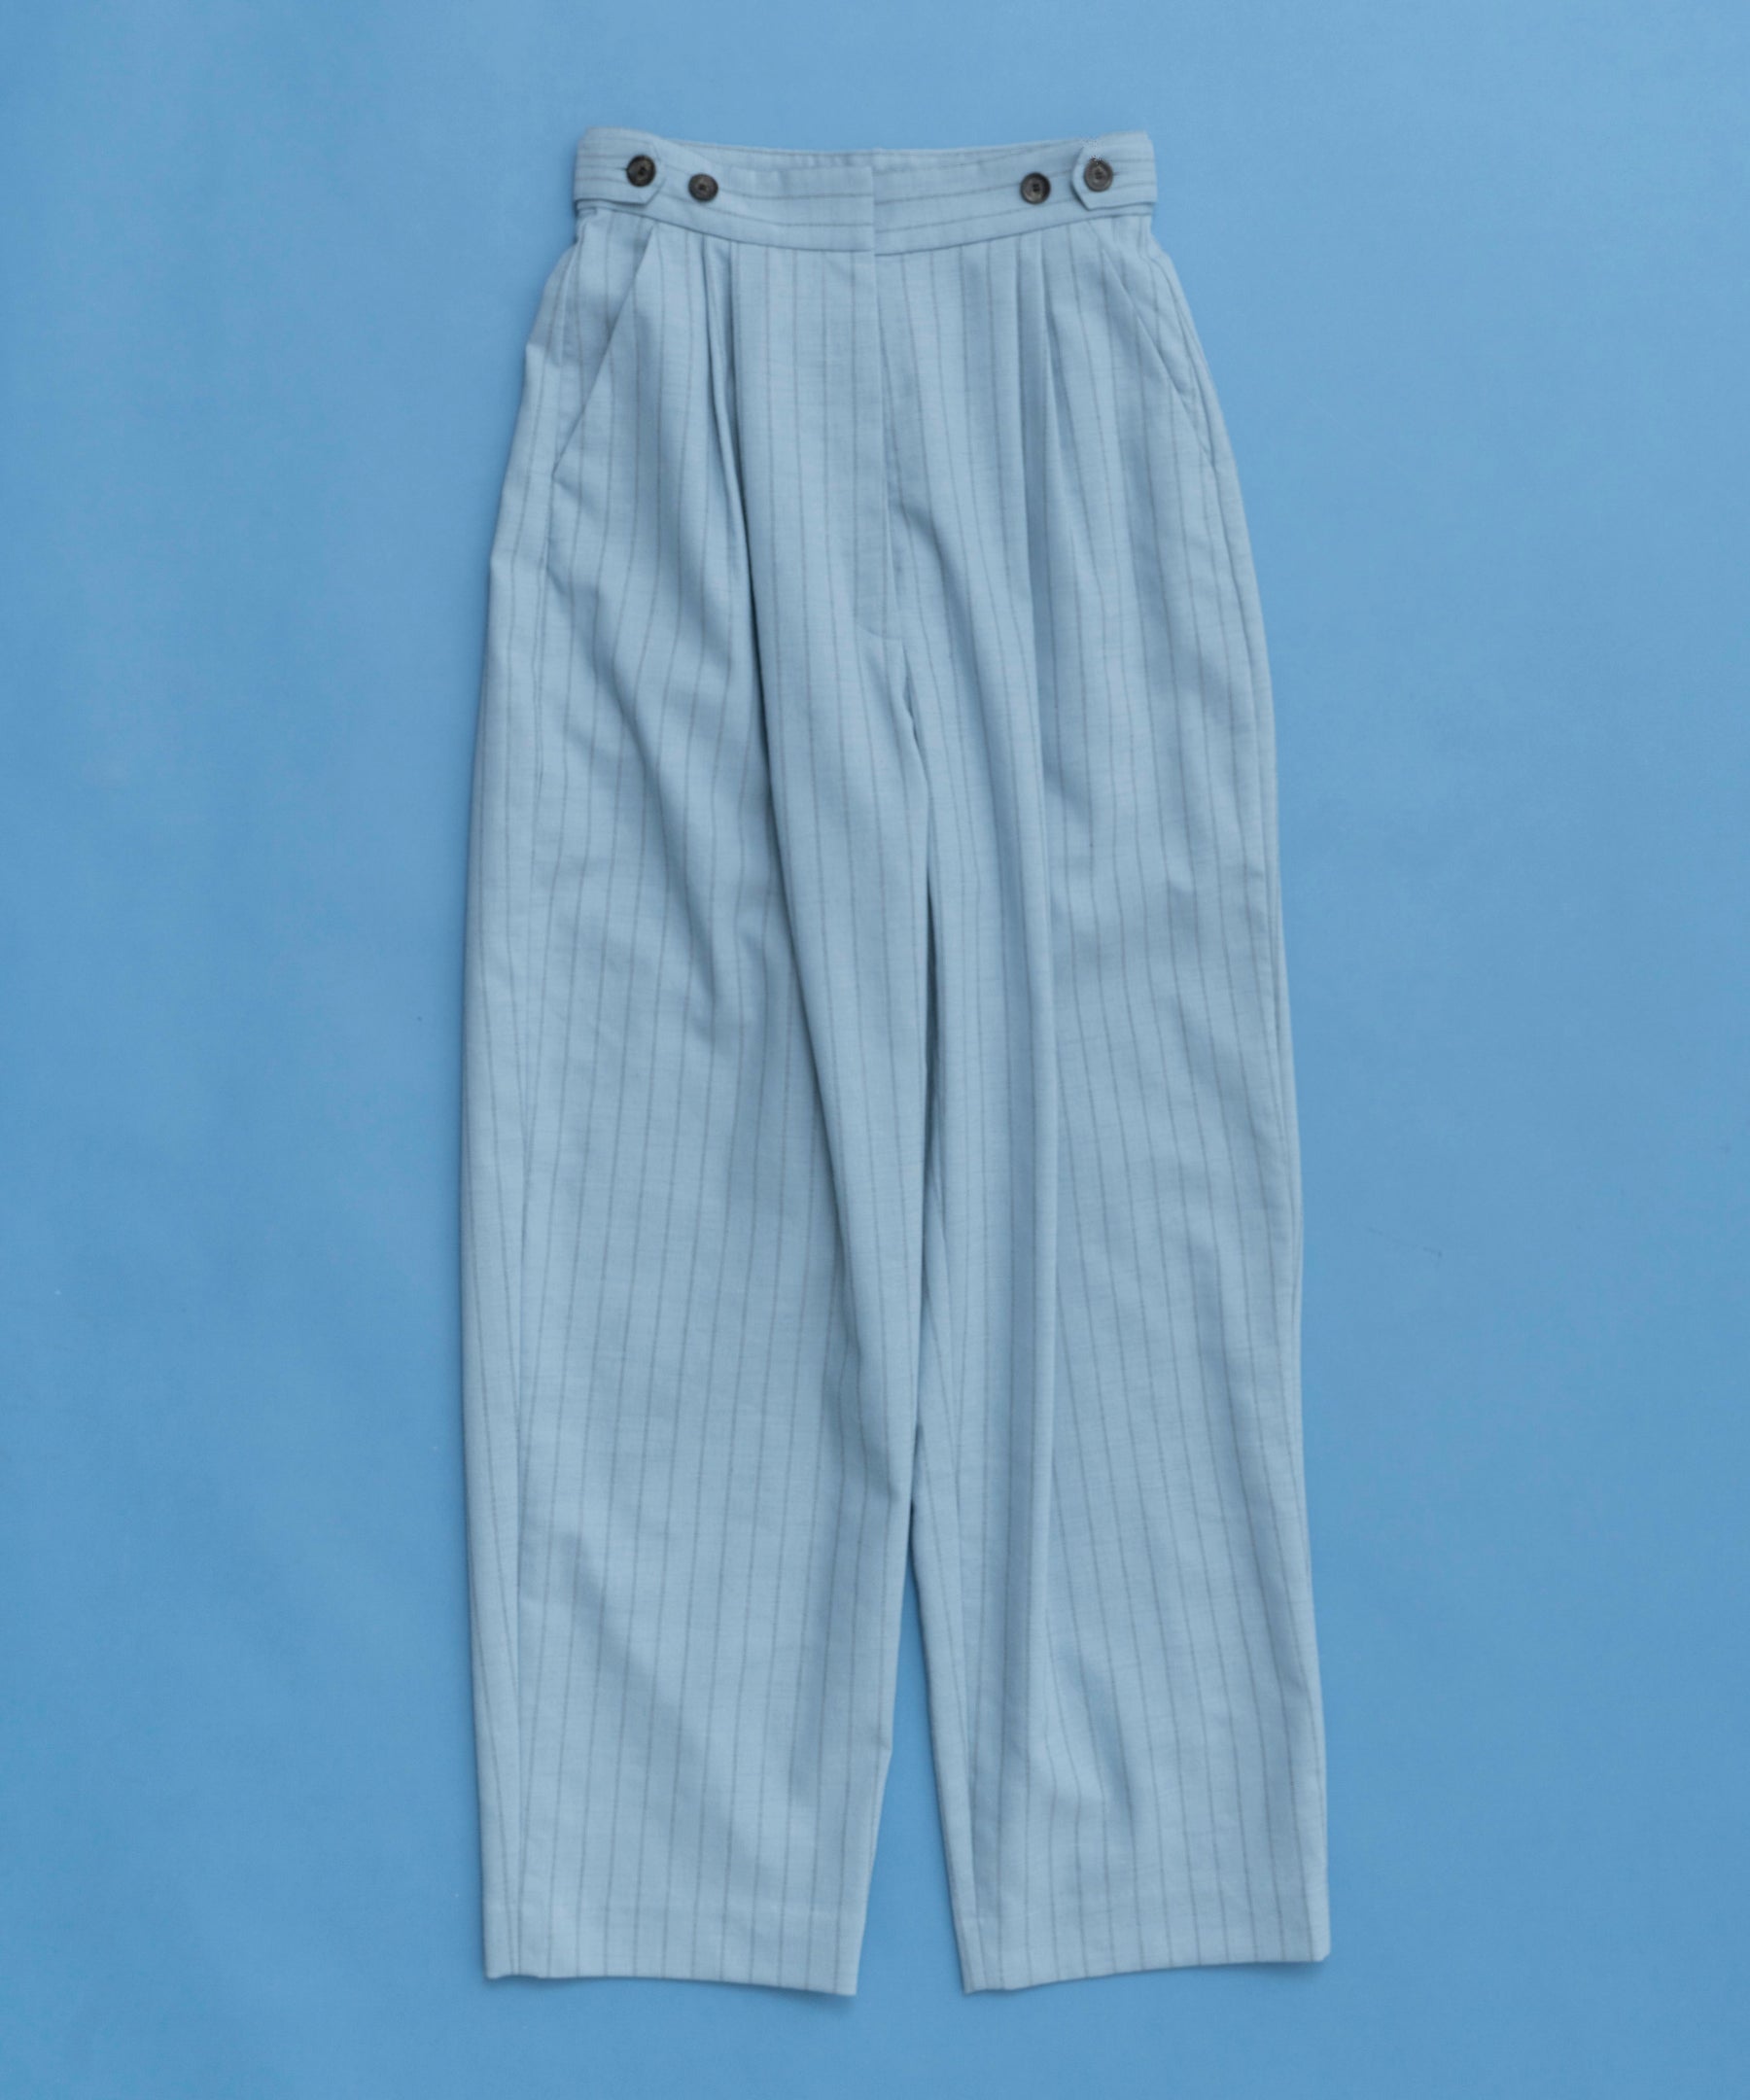 【SALE】Belted Balloon Pants